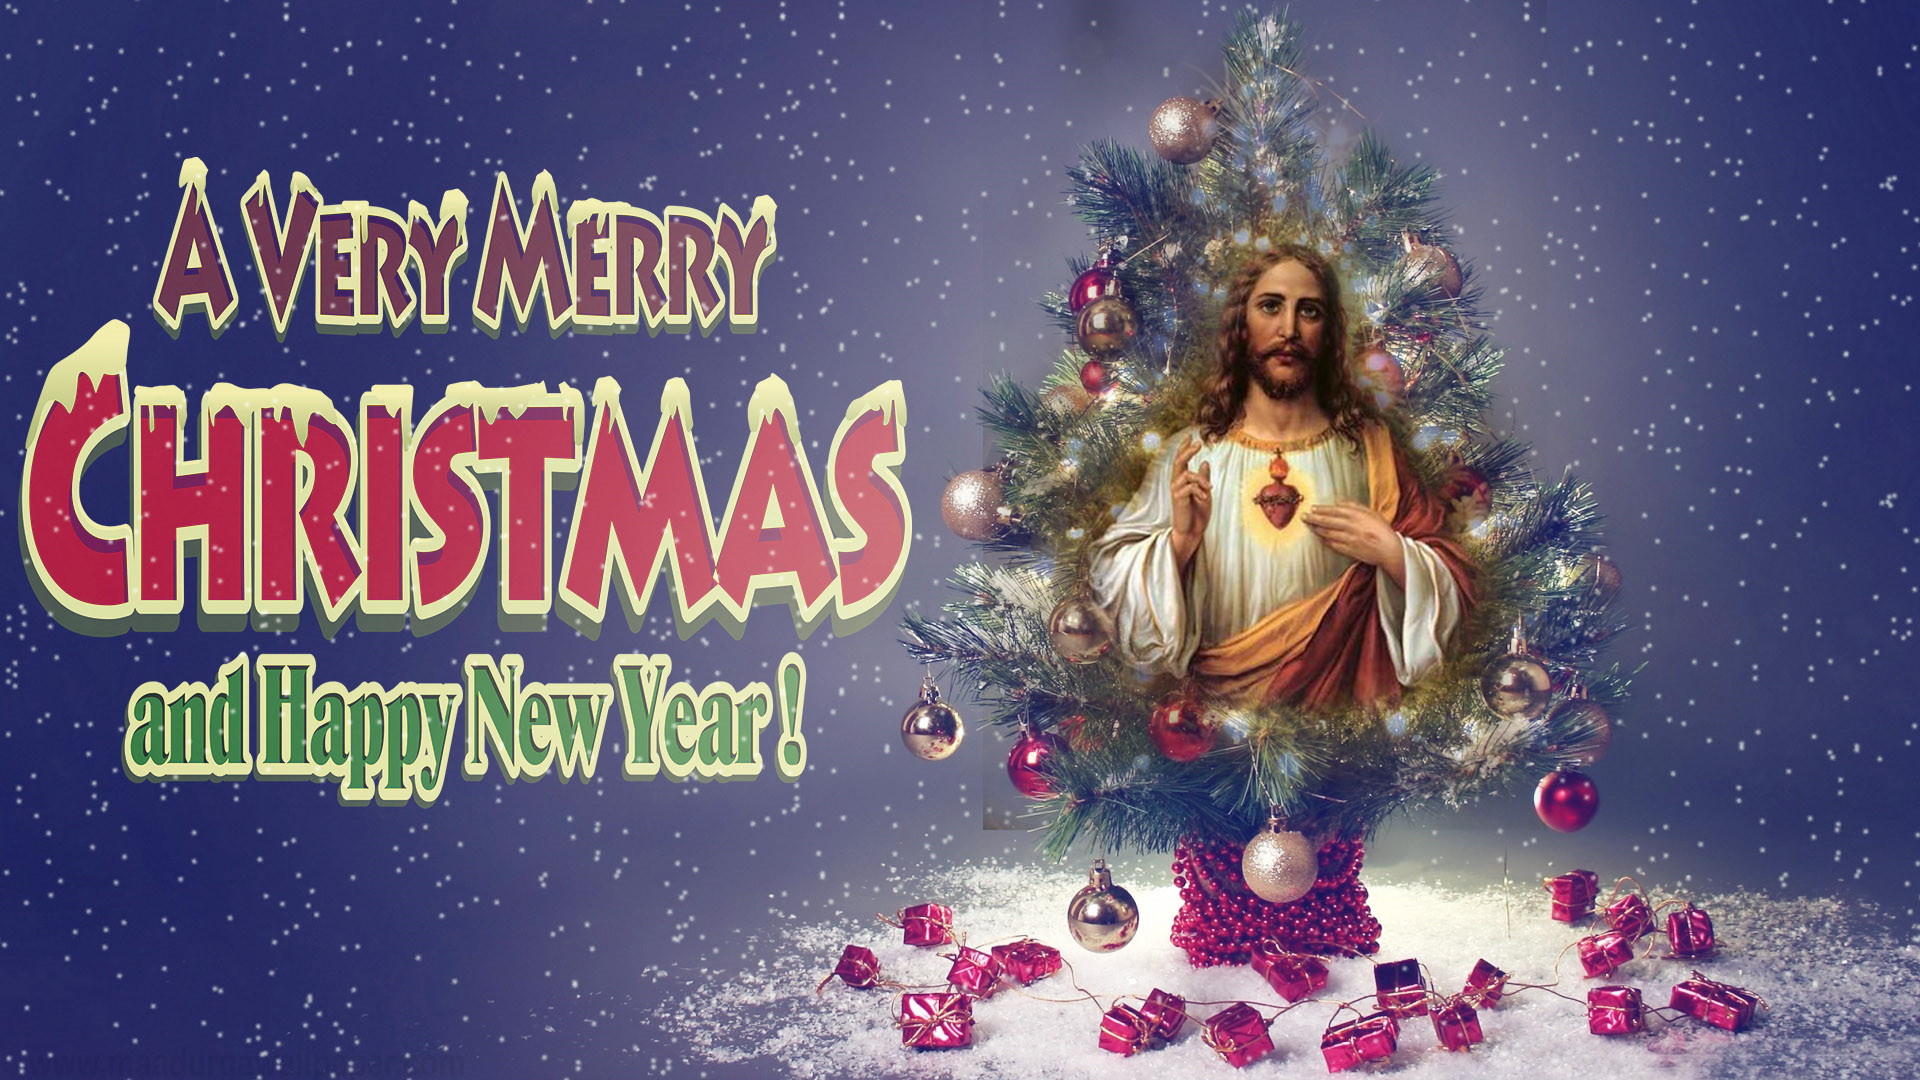 Merry Christmas Greetings Messages Image Xmas